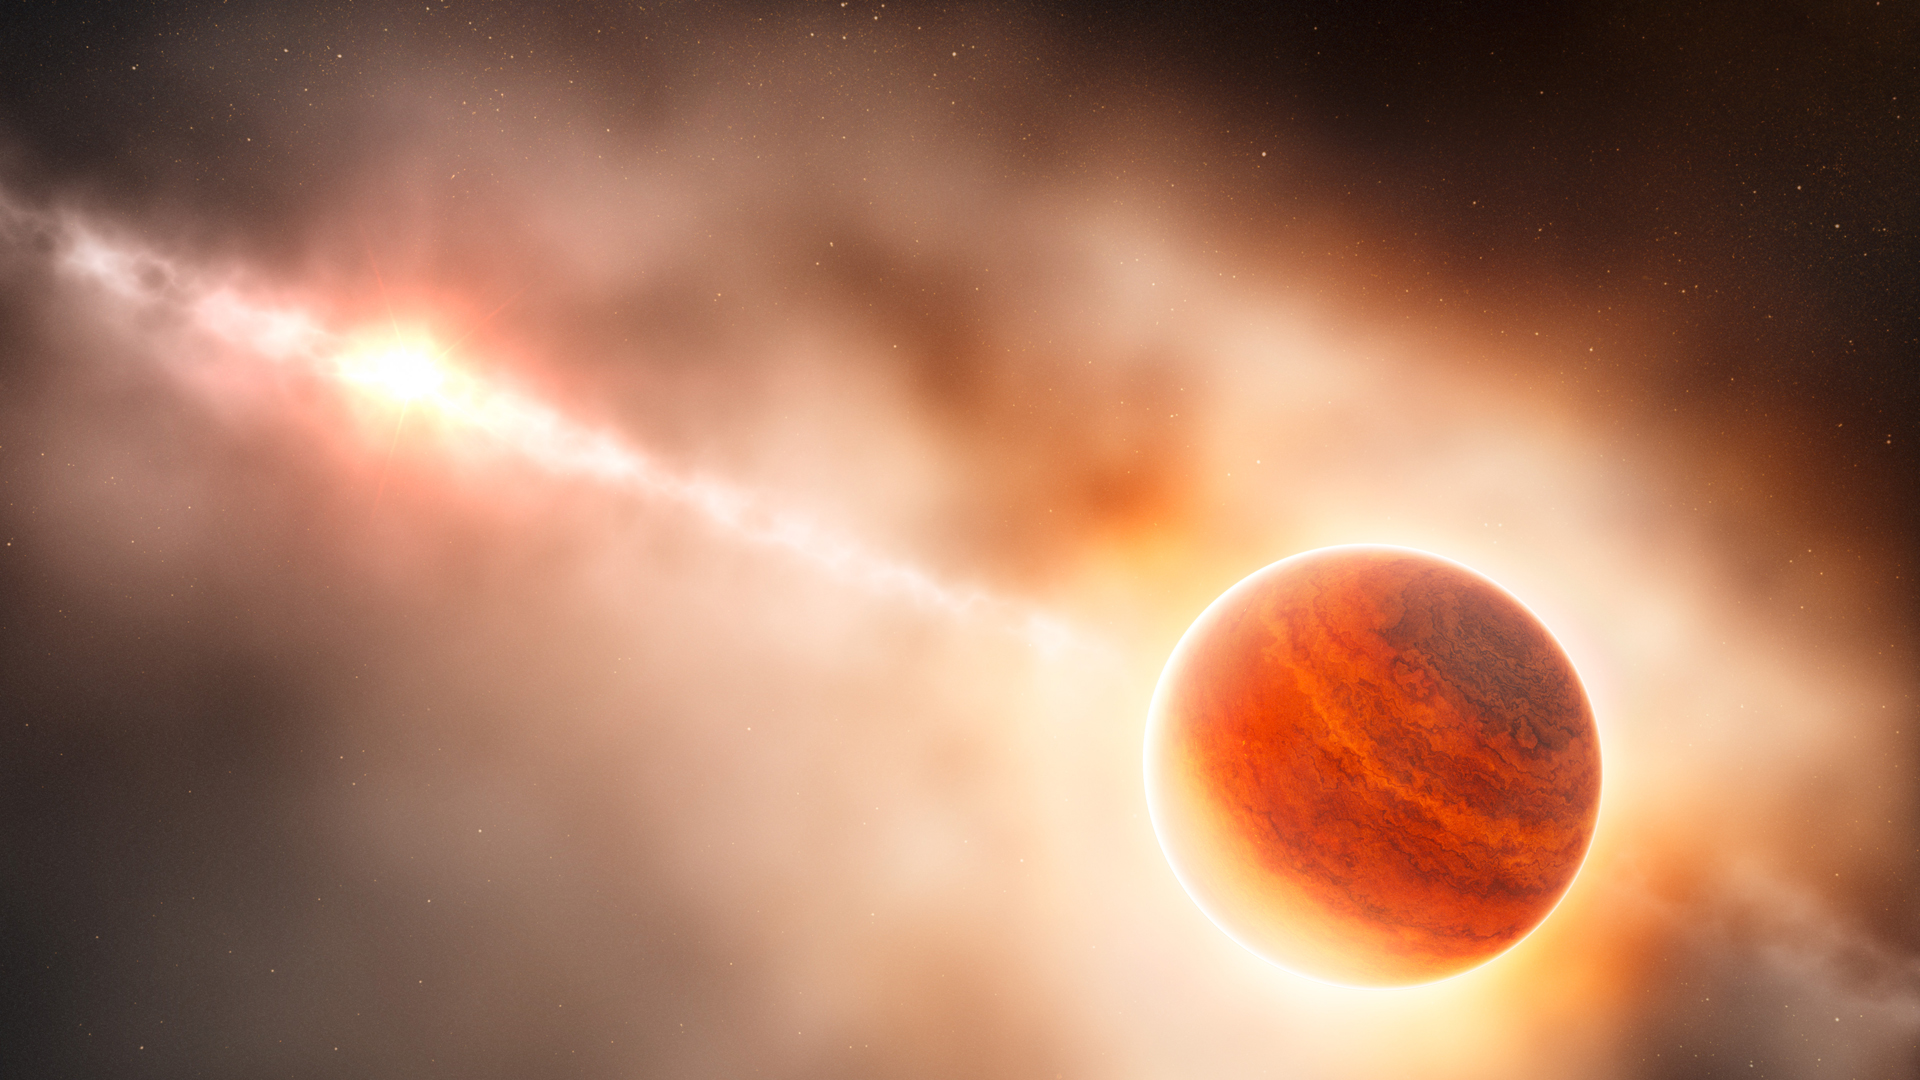 Scientists are still researching&mdash;and debating&mdash;how large gaseous planets form.